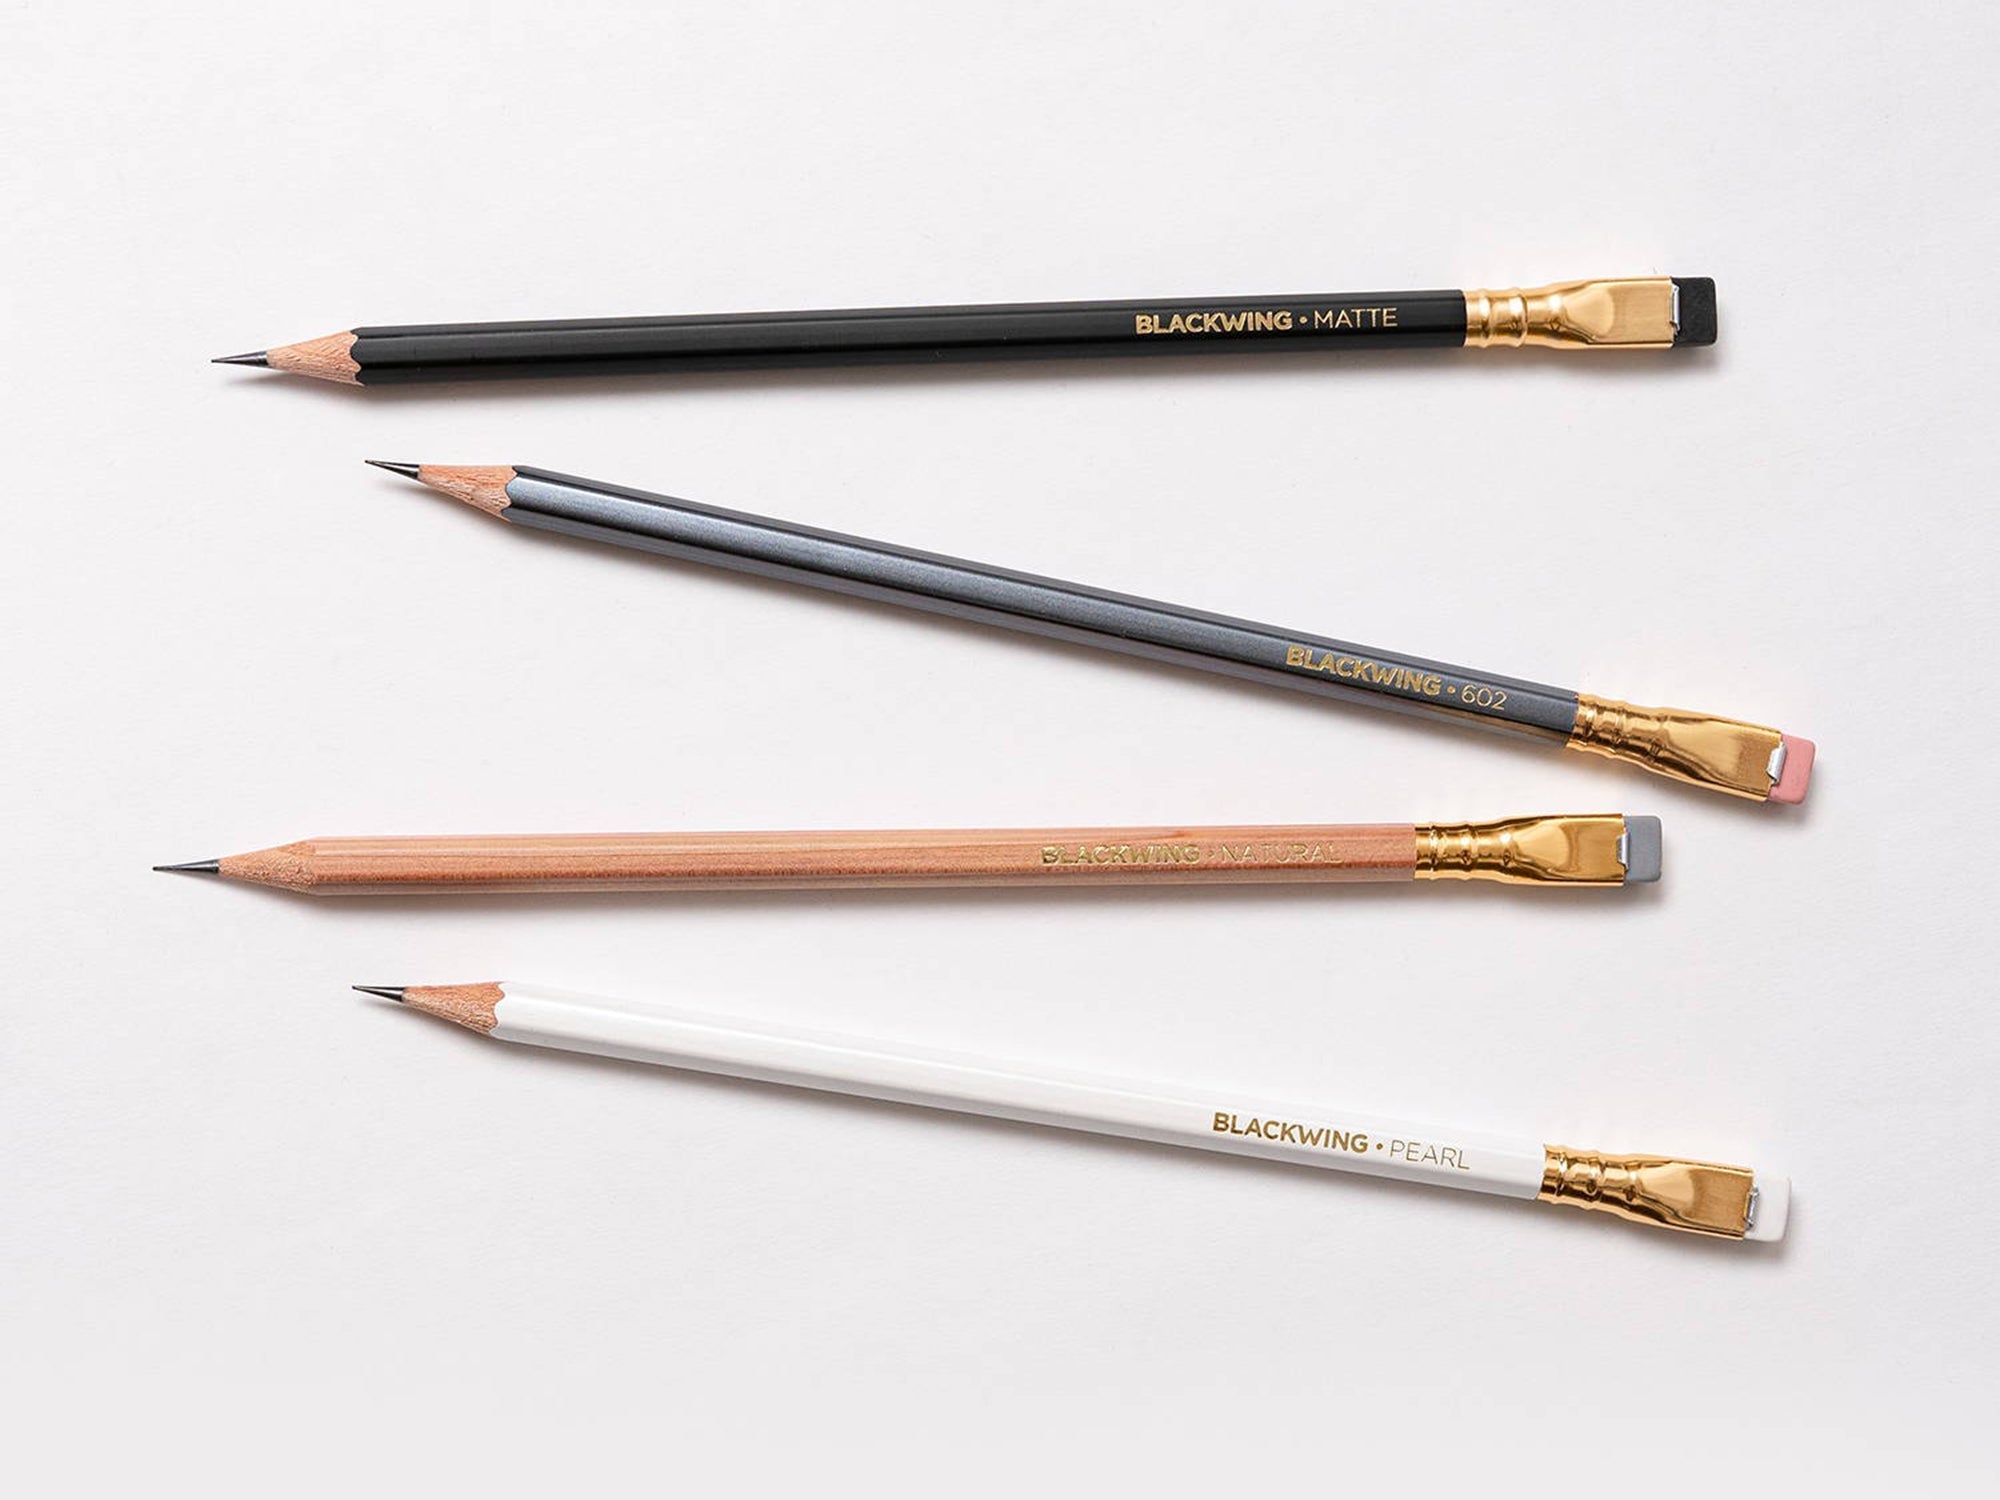 Blackwing Matte Pencils (Set of 12) - Available at Grounded